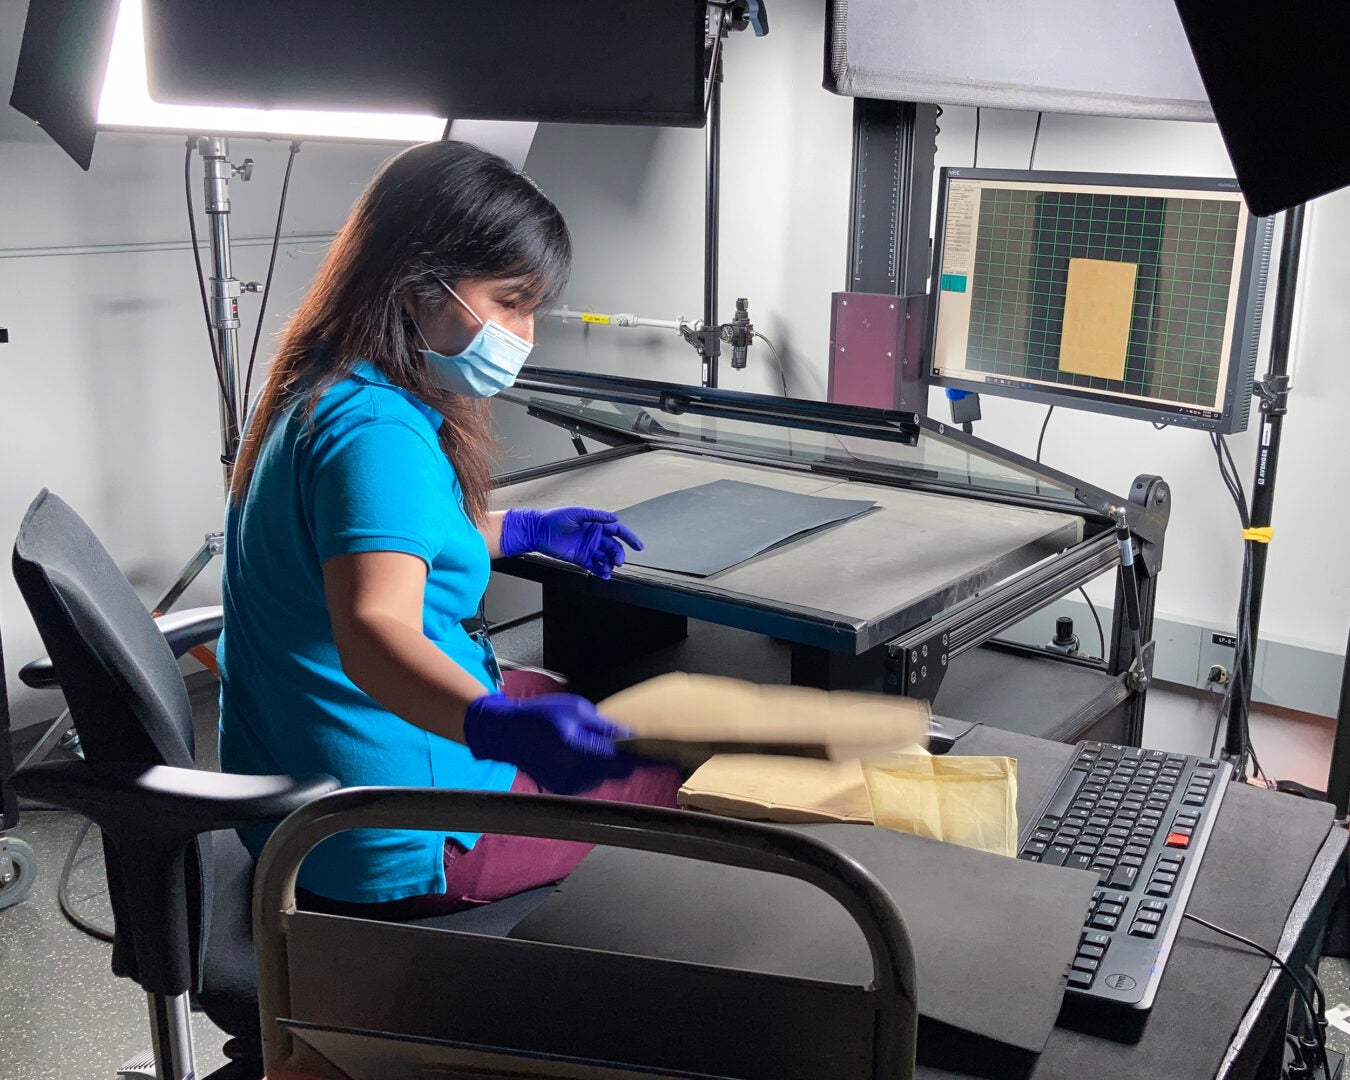 Penny Xu scanning a book.